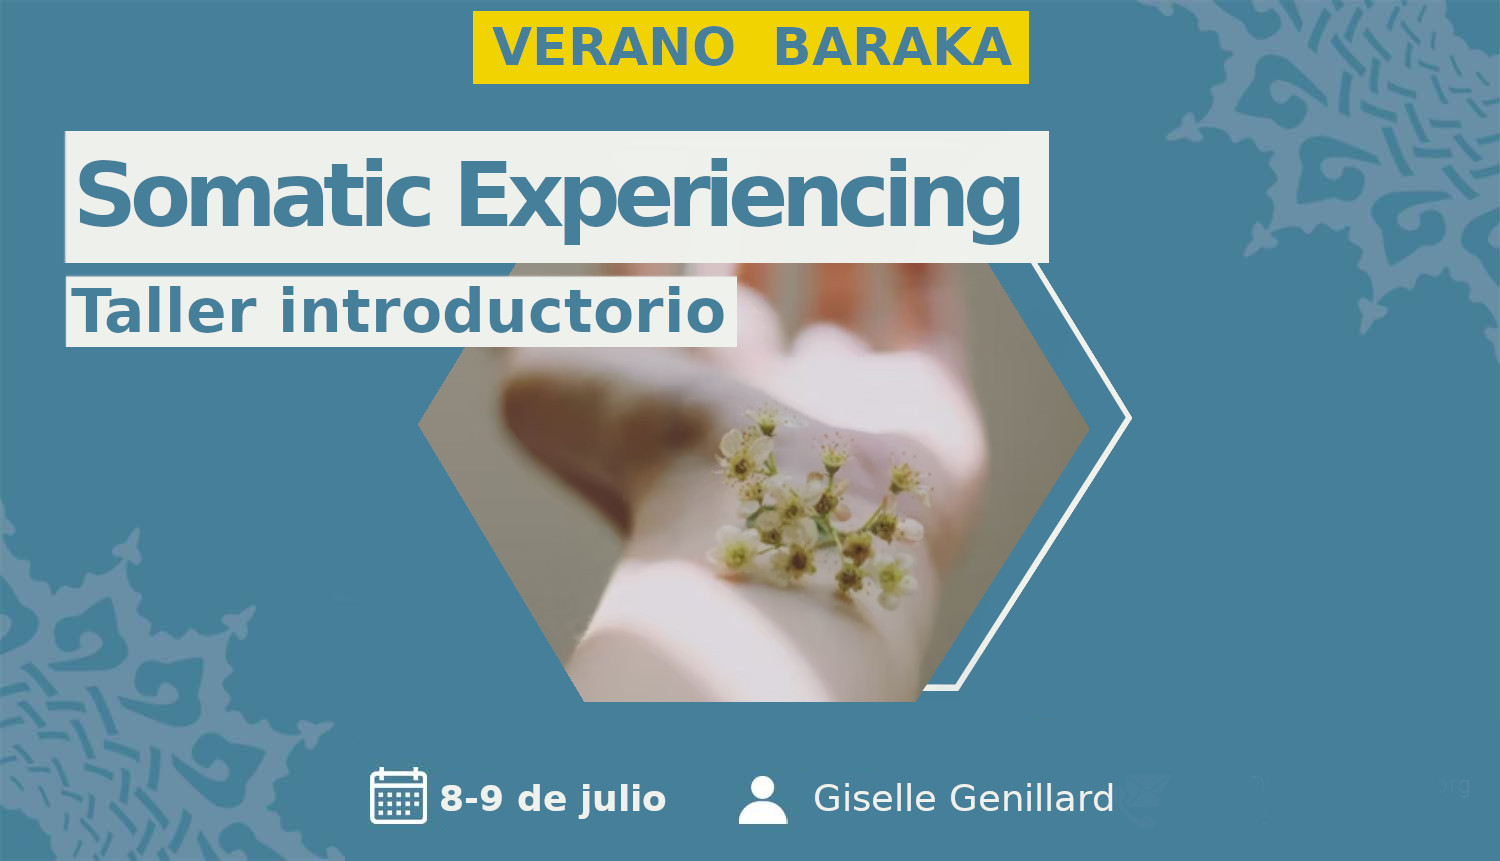 Somatic experiencing. Taller introductorio